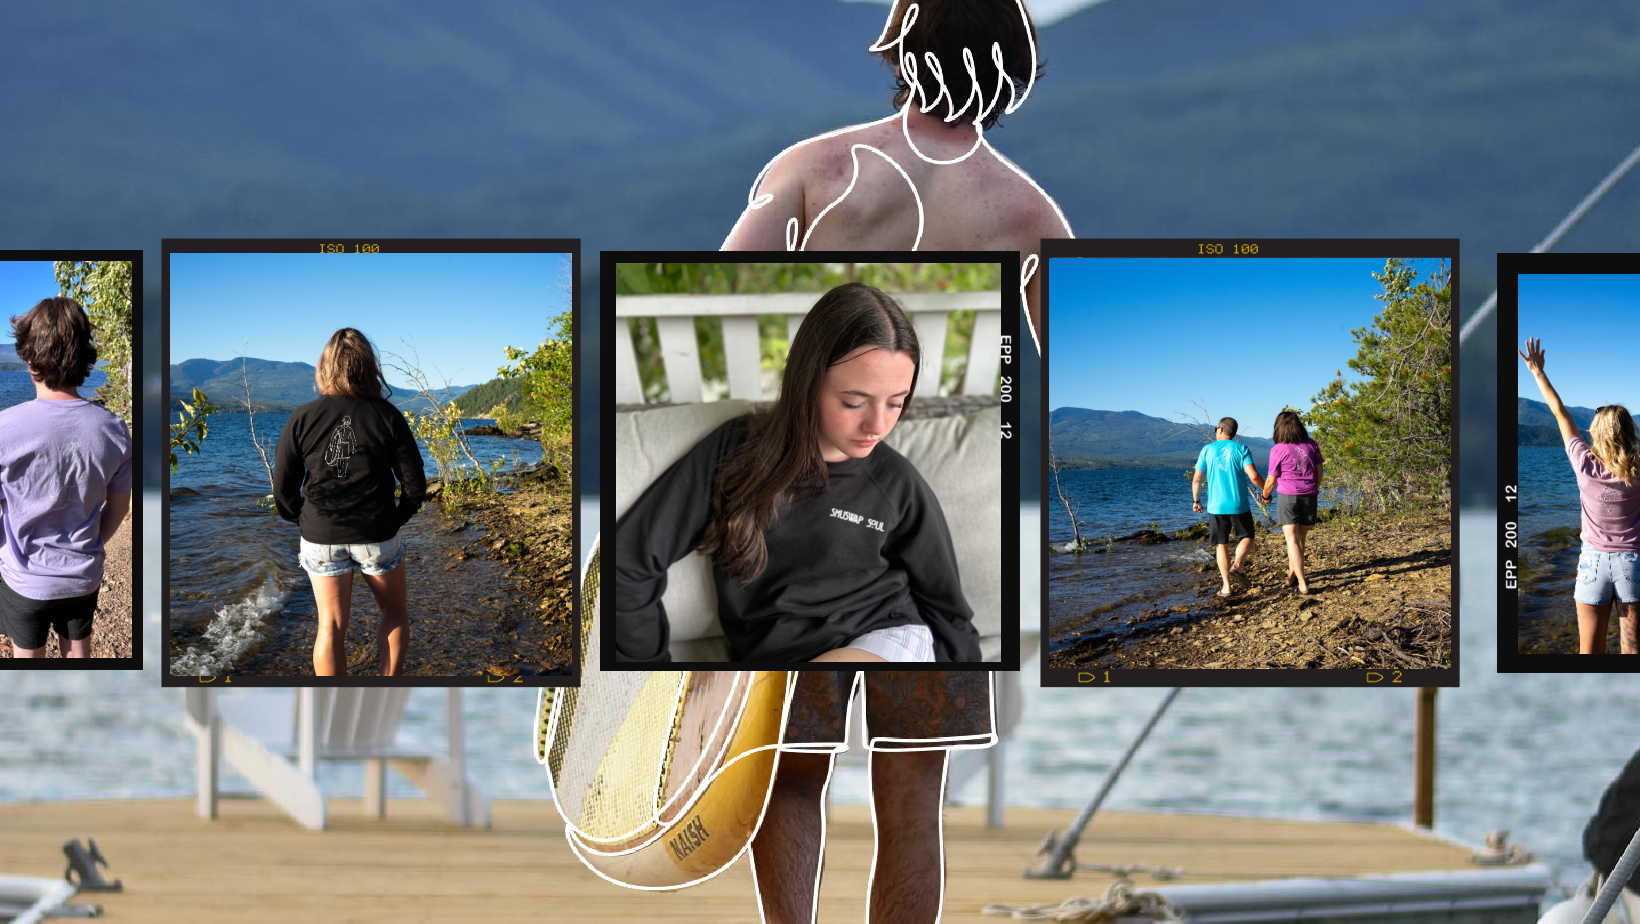 A photo of a man with a paddleboard and a line drawing around his silhouette. On top of that main image are five smaller images that look like they are part of an old film strip. From left to right, the first is a man in a purple Shuswap shirt looking at the lake, then a photo of a women in a black Shuswap sweater looking out at the lake, the middle one is a girl sitting on a chair looking reflective, the fourth is a couple holding hands walking along the beach away from the camera and the last shot is a woman with on a beach with her hands up in celebration. 